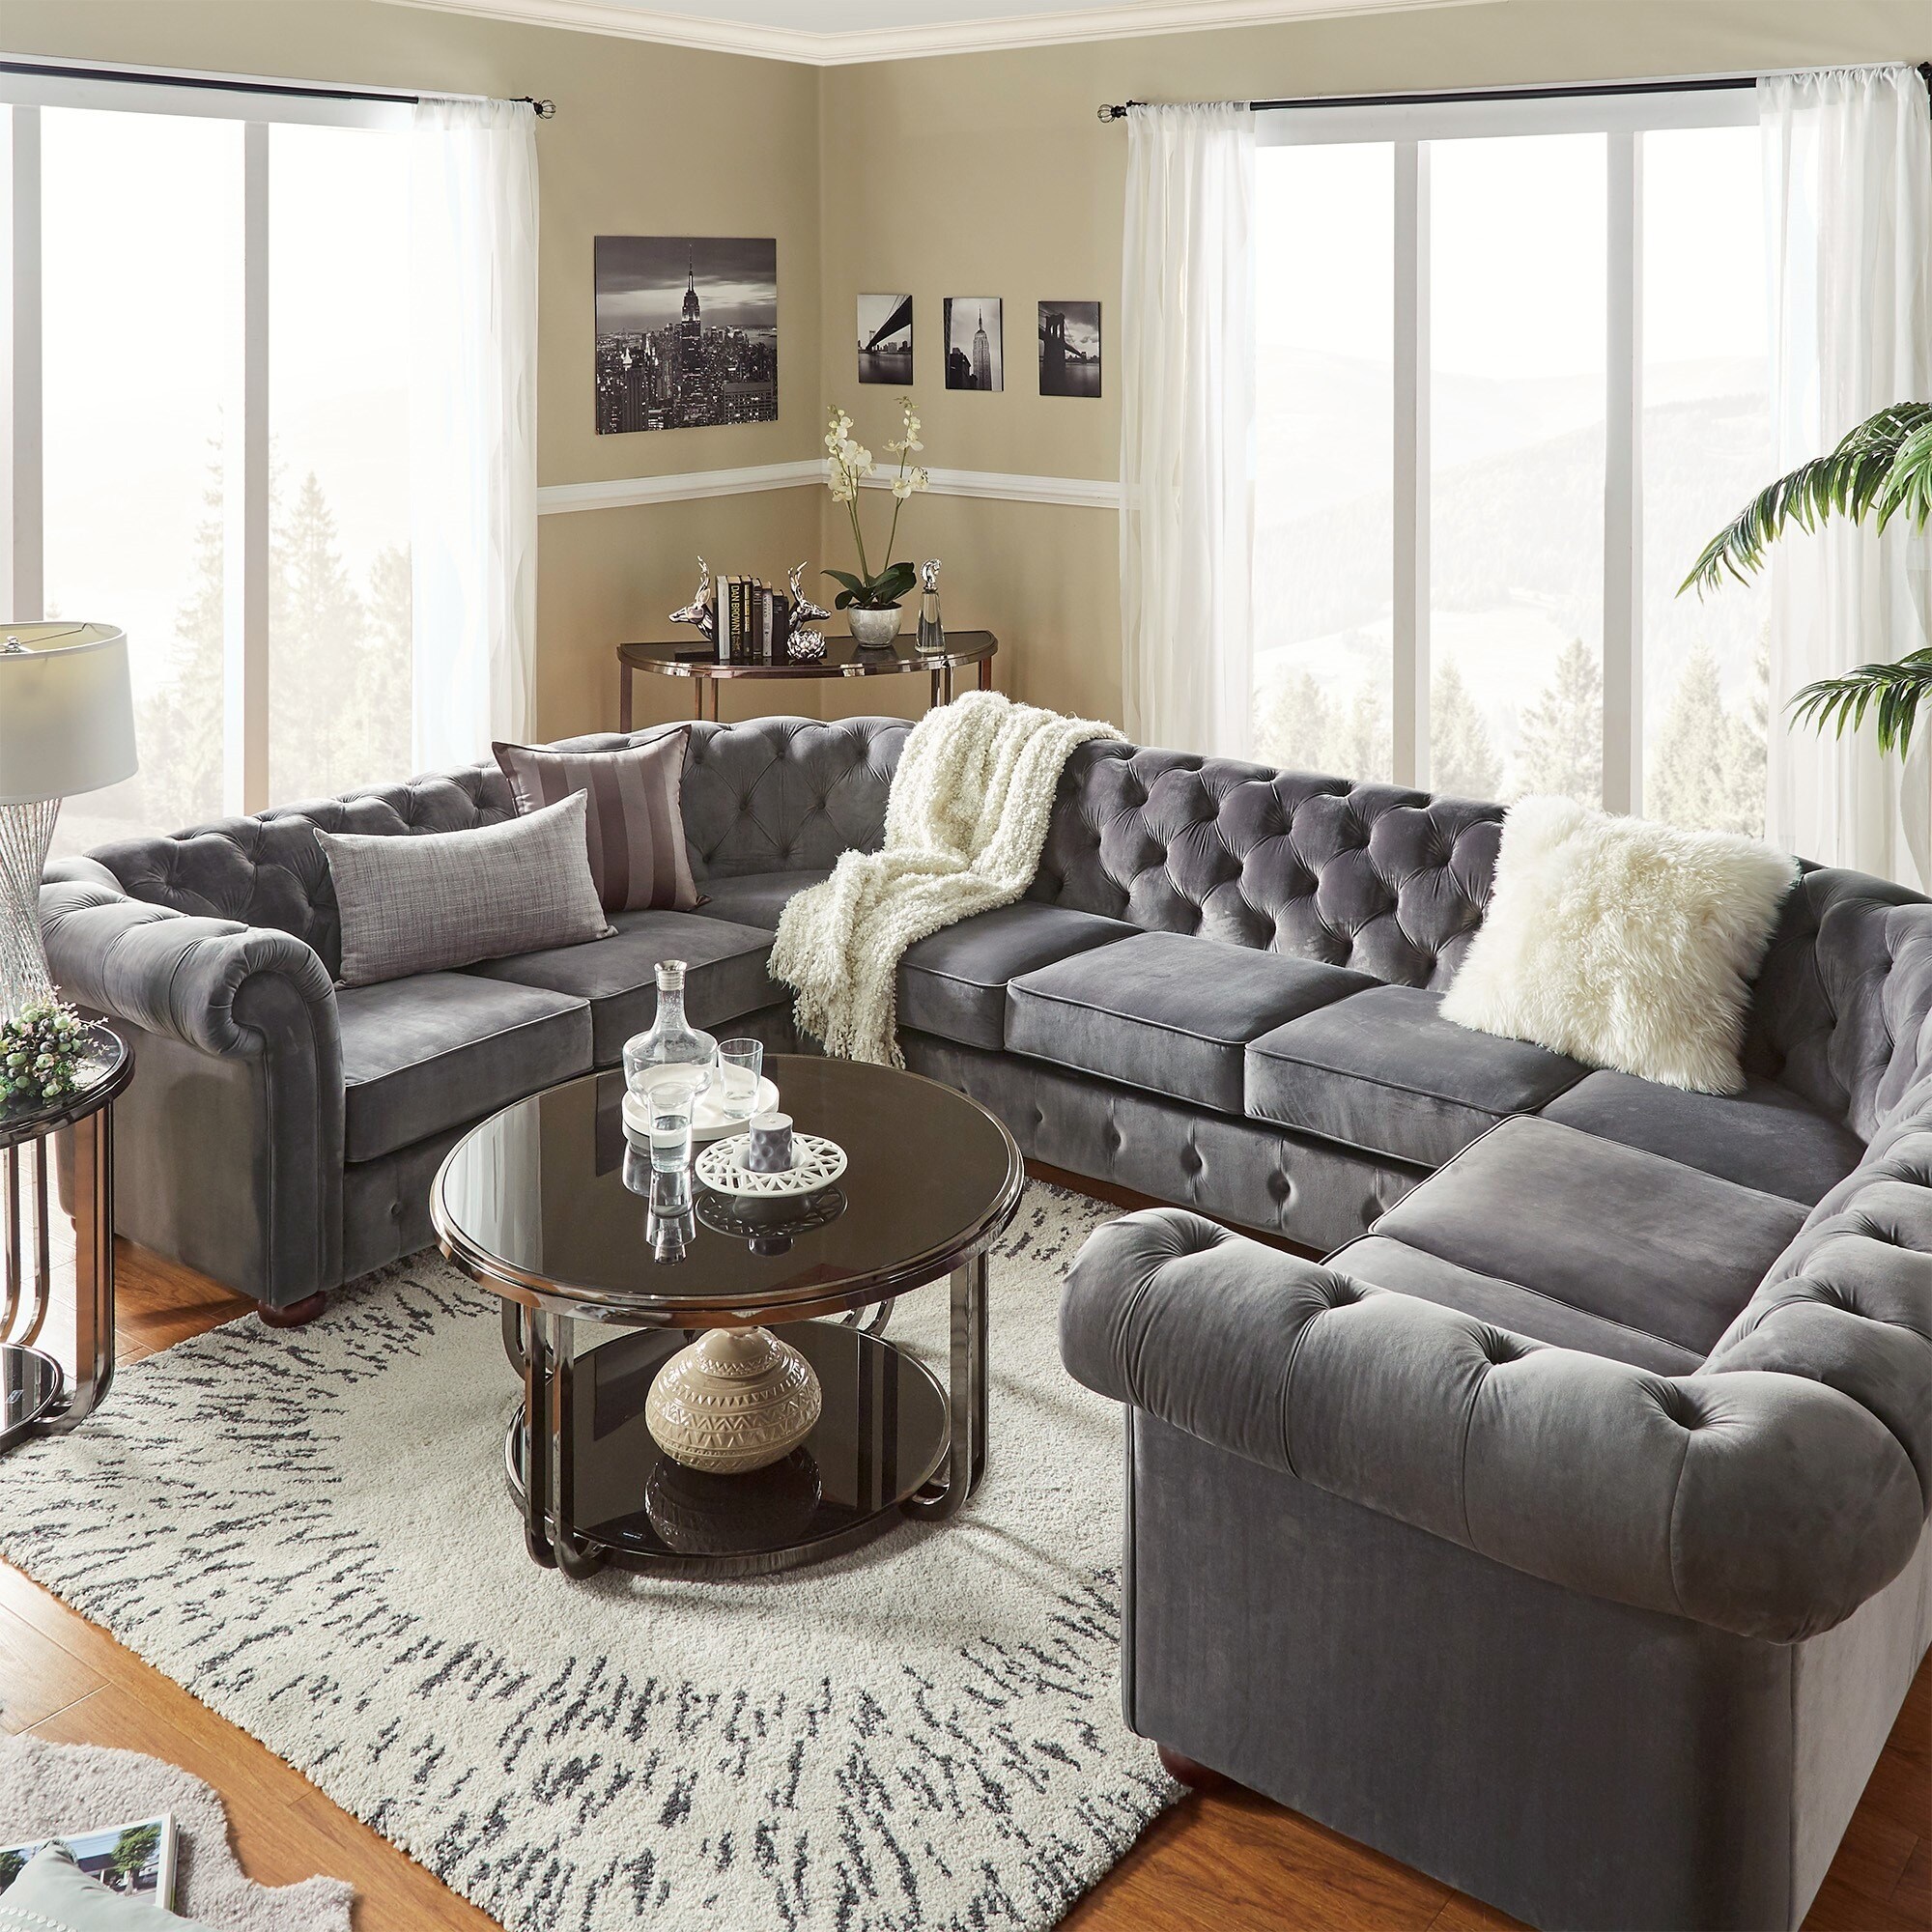 9-Seat U-Shaped Chesterfield Sectional Sofa